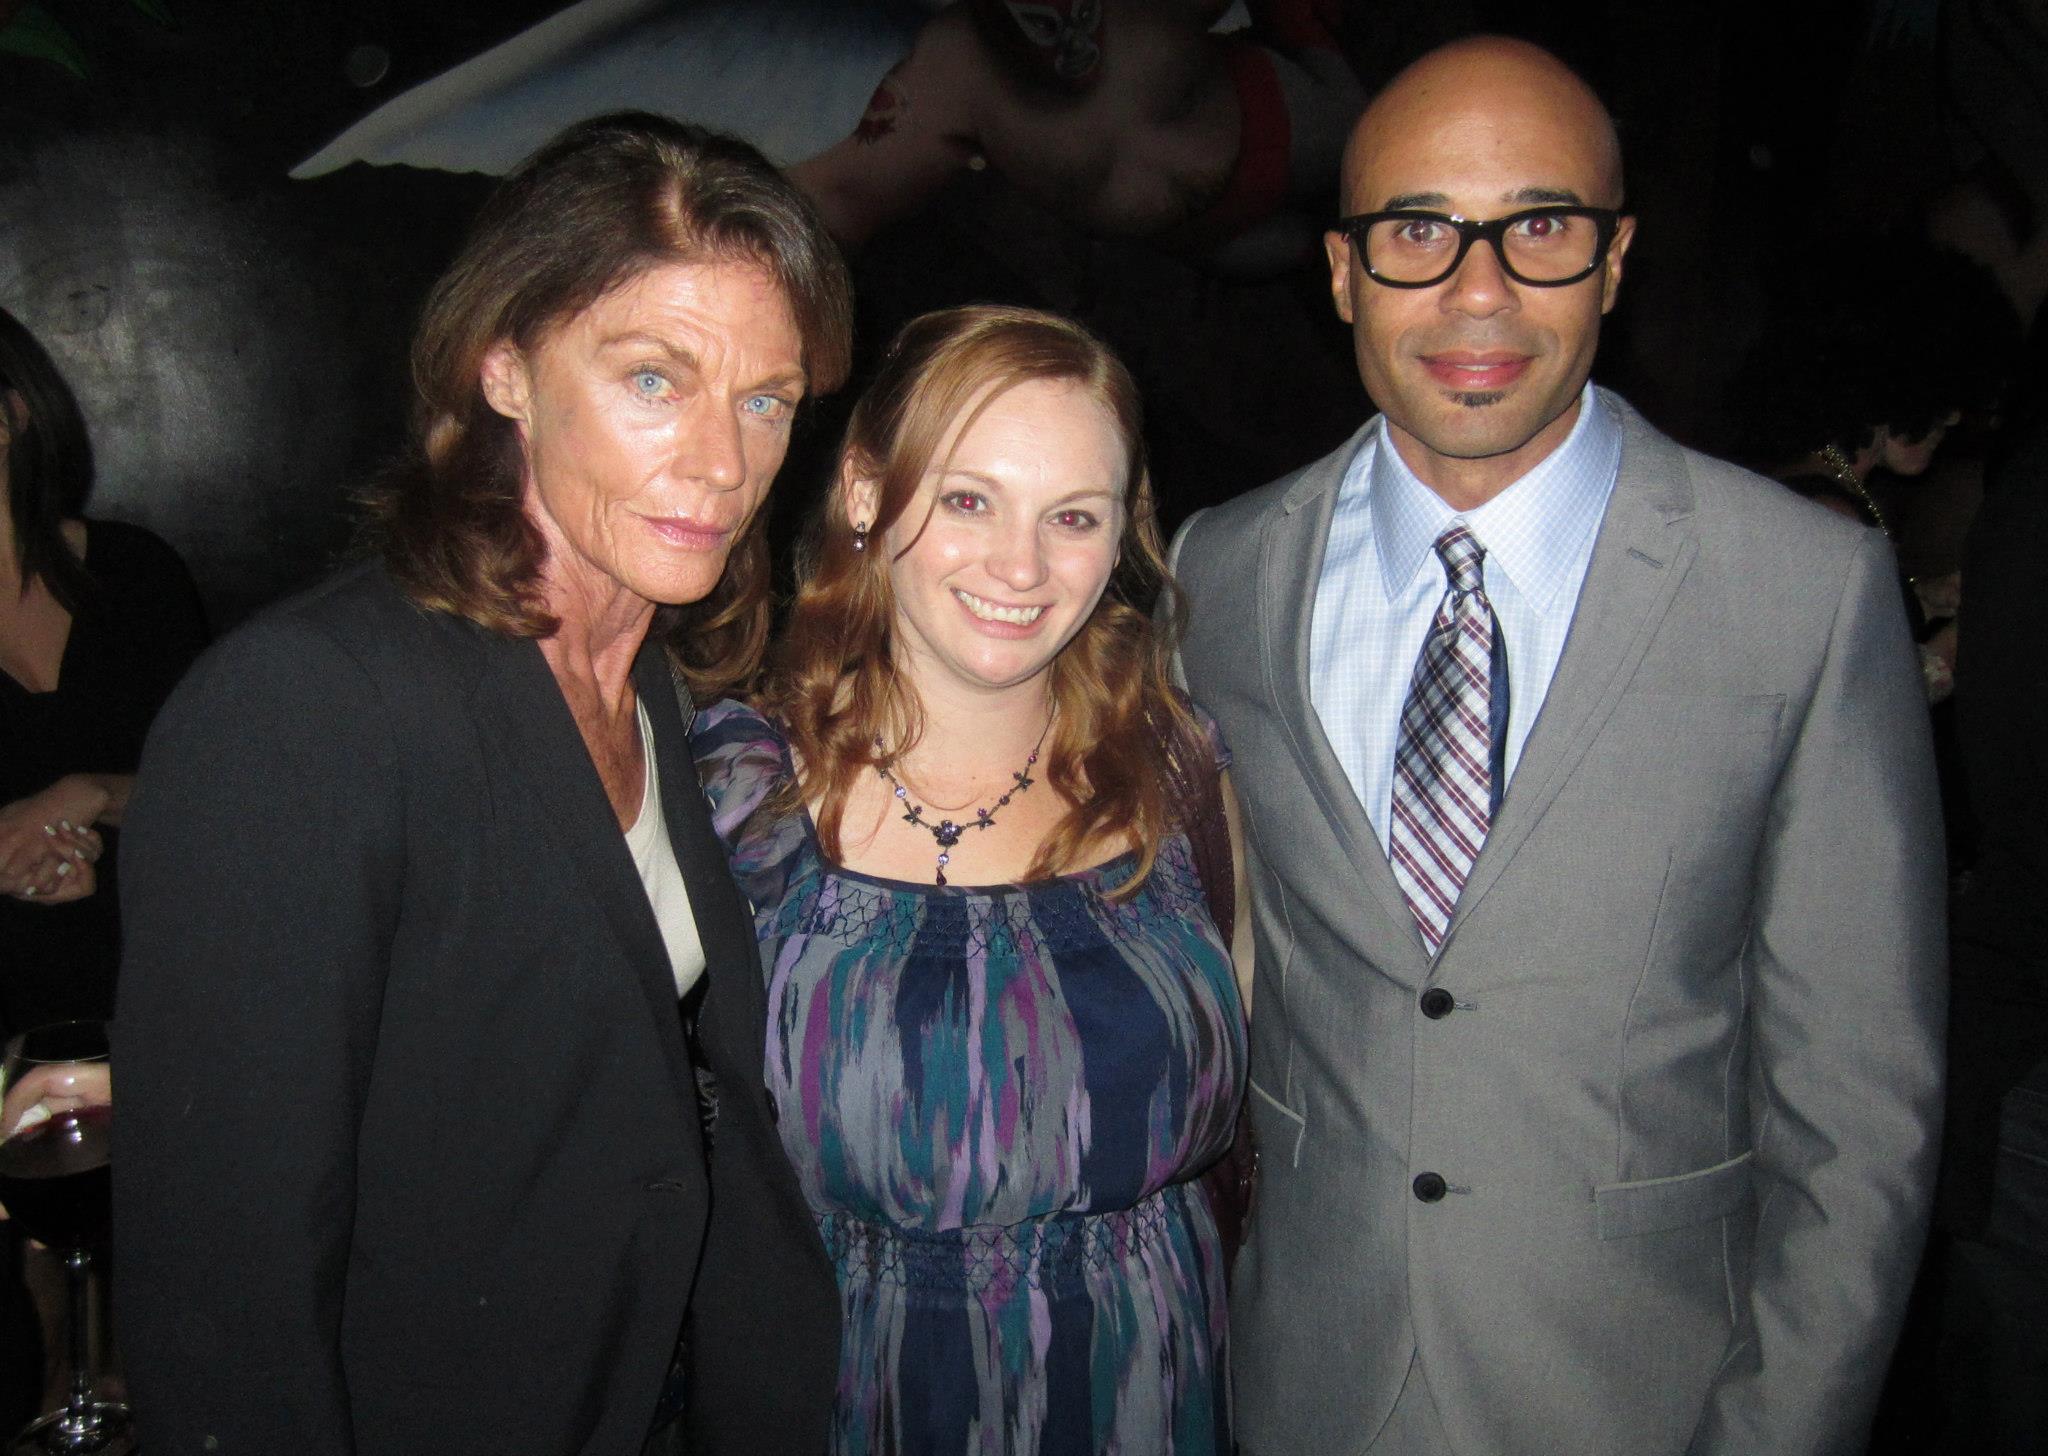 Meg Foster, Sarah Allyn Bauer, Chris Roe at sCare Foundation Benefit 2012